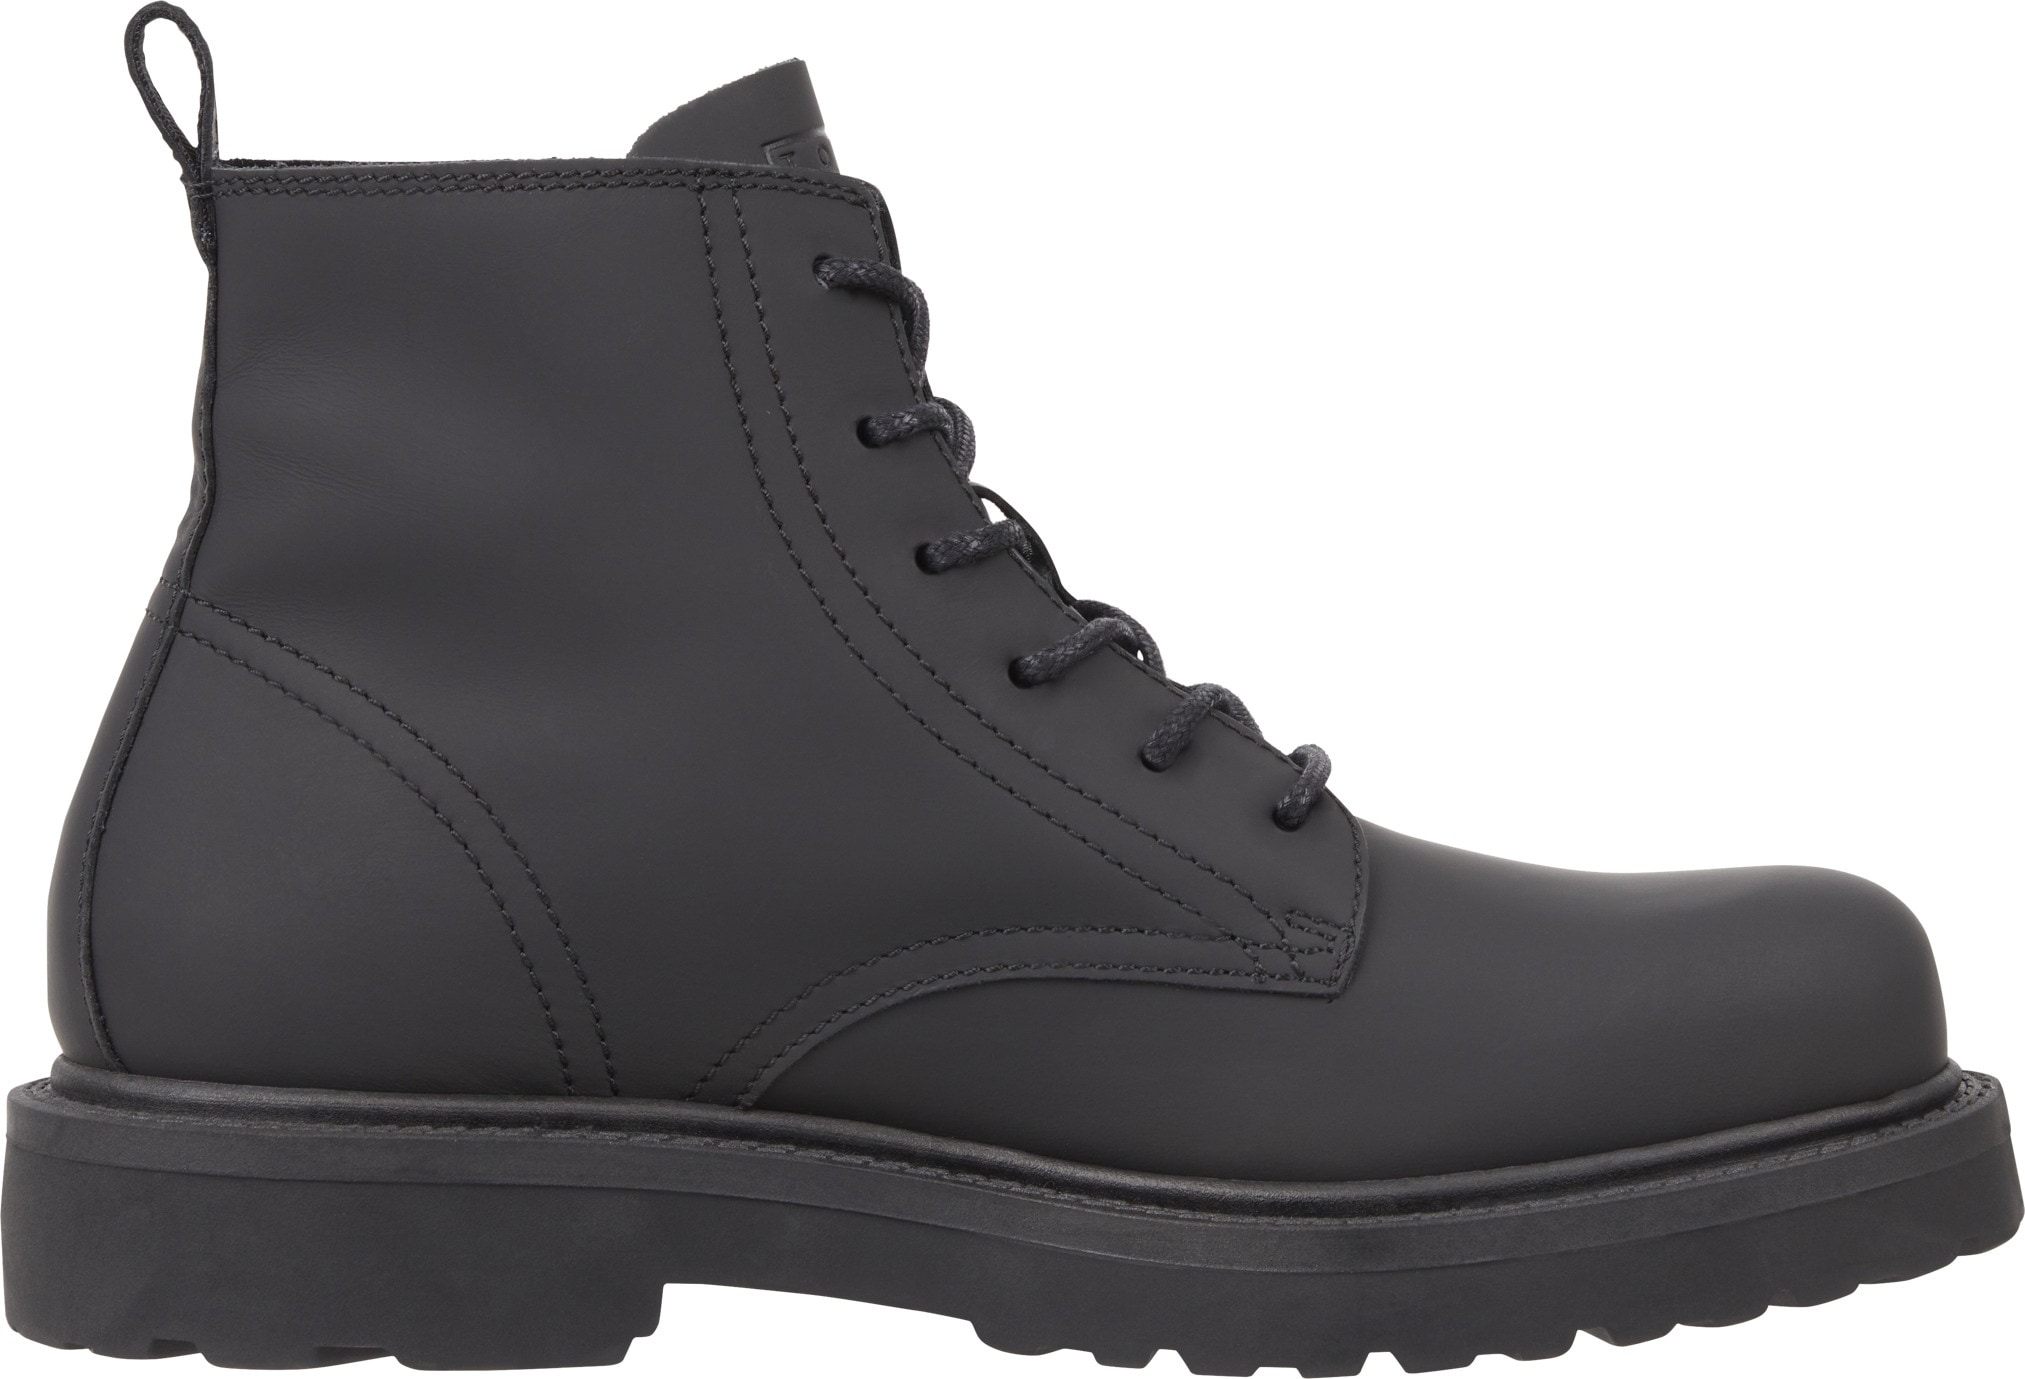 Tommy Jeans Schnürboots »TJM RUBERIZED LACE UP BOOT«, mit seitlicher Logoflagge